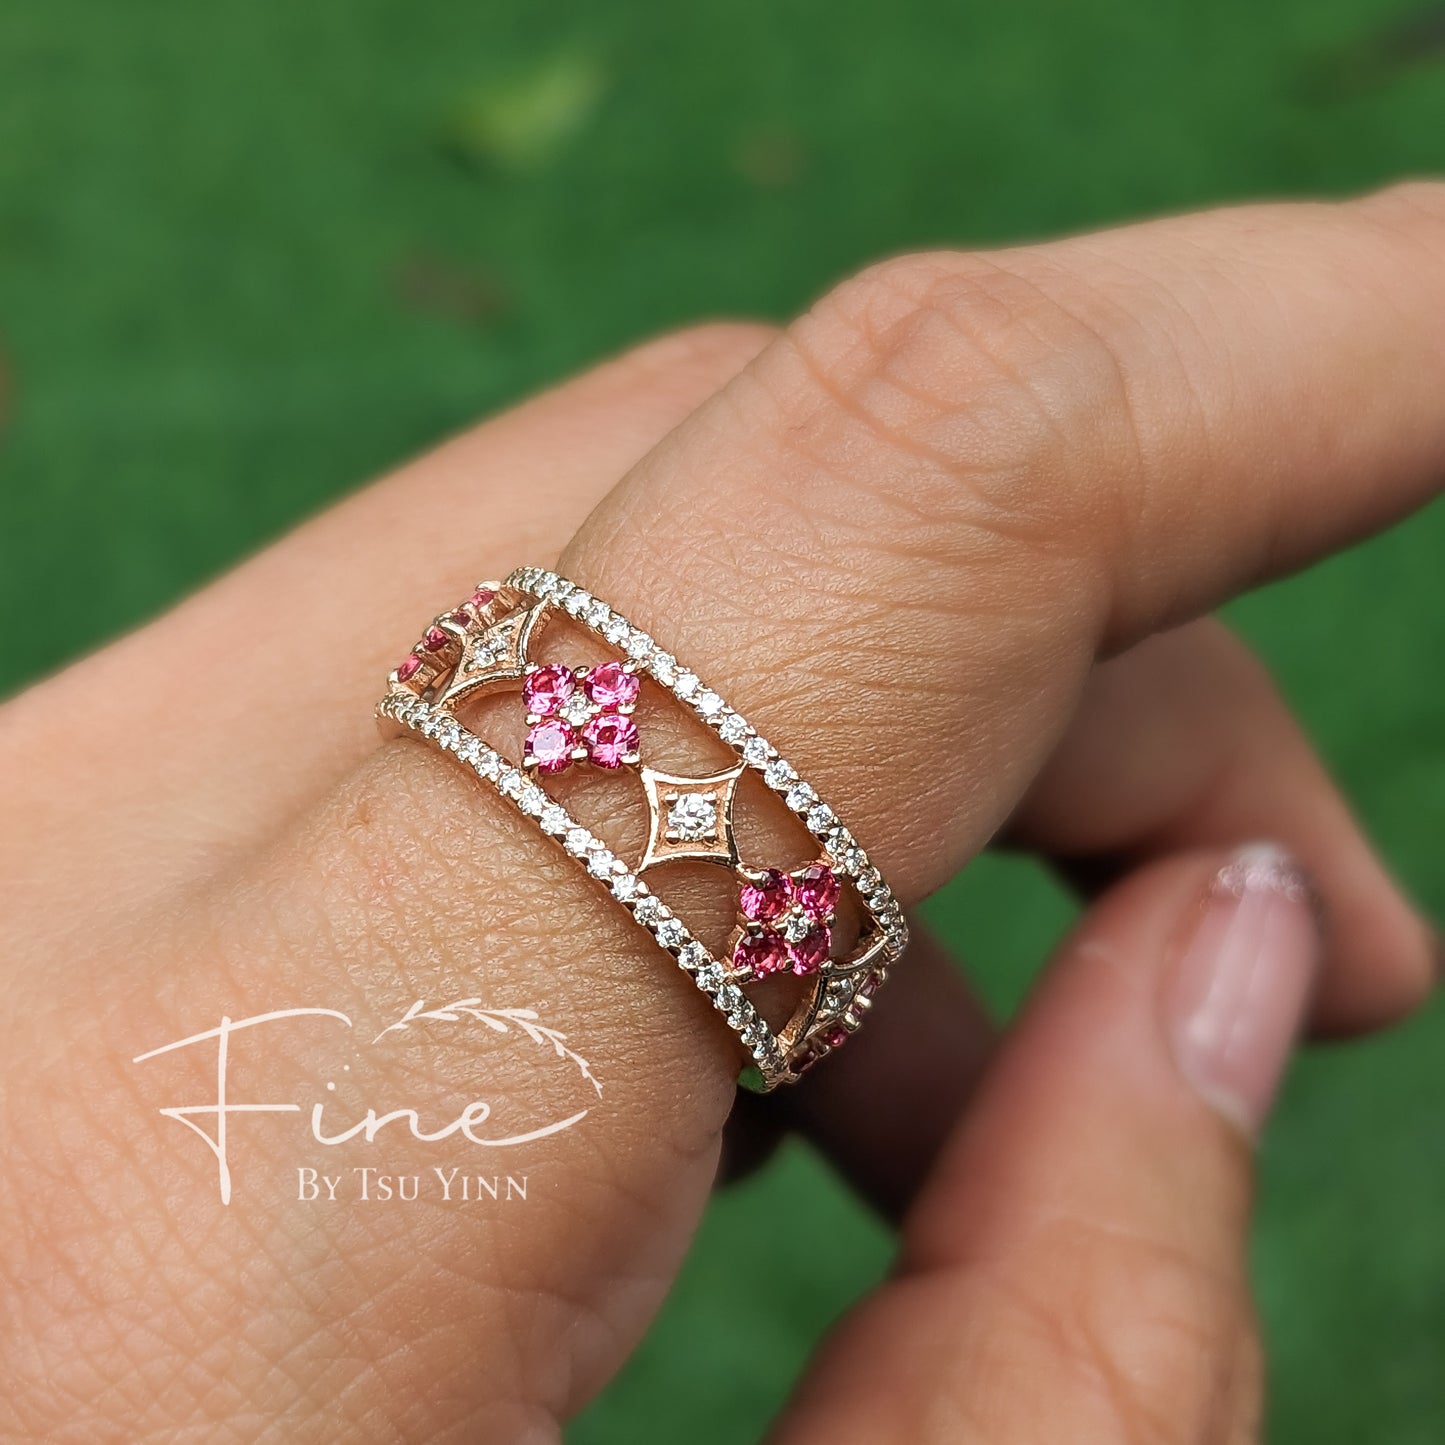 RG FBTY Juan Eternity Diamond Ring with Bright Pink Spinels